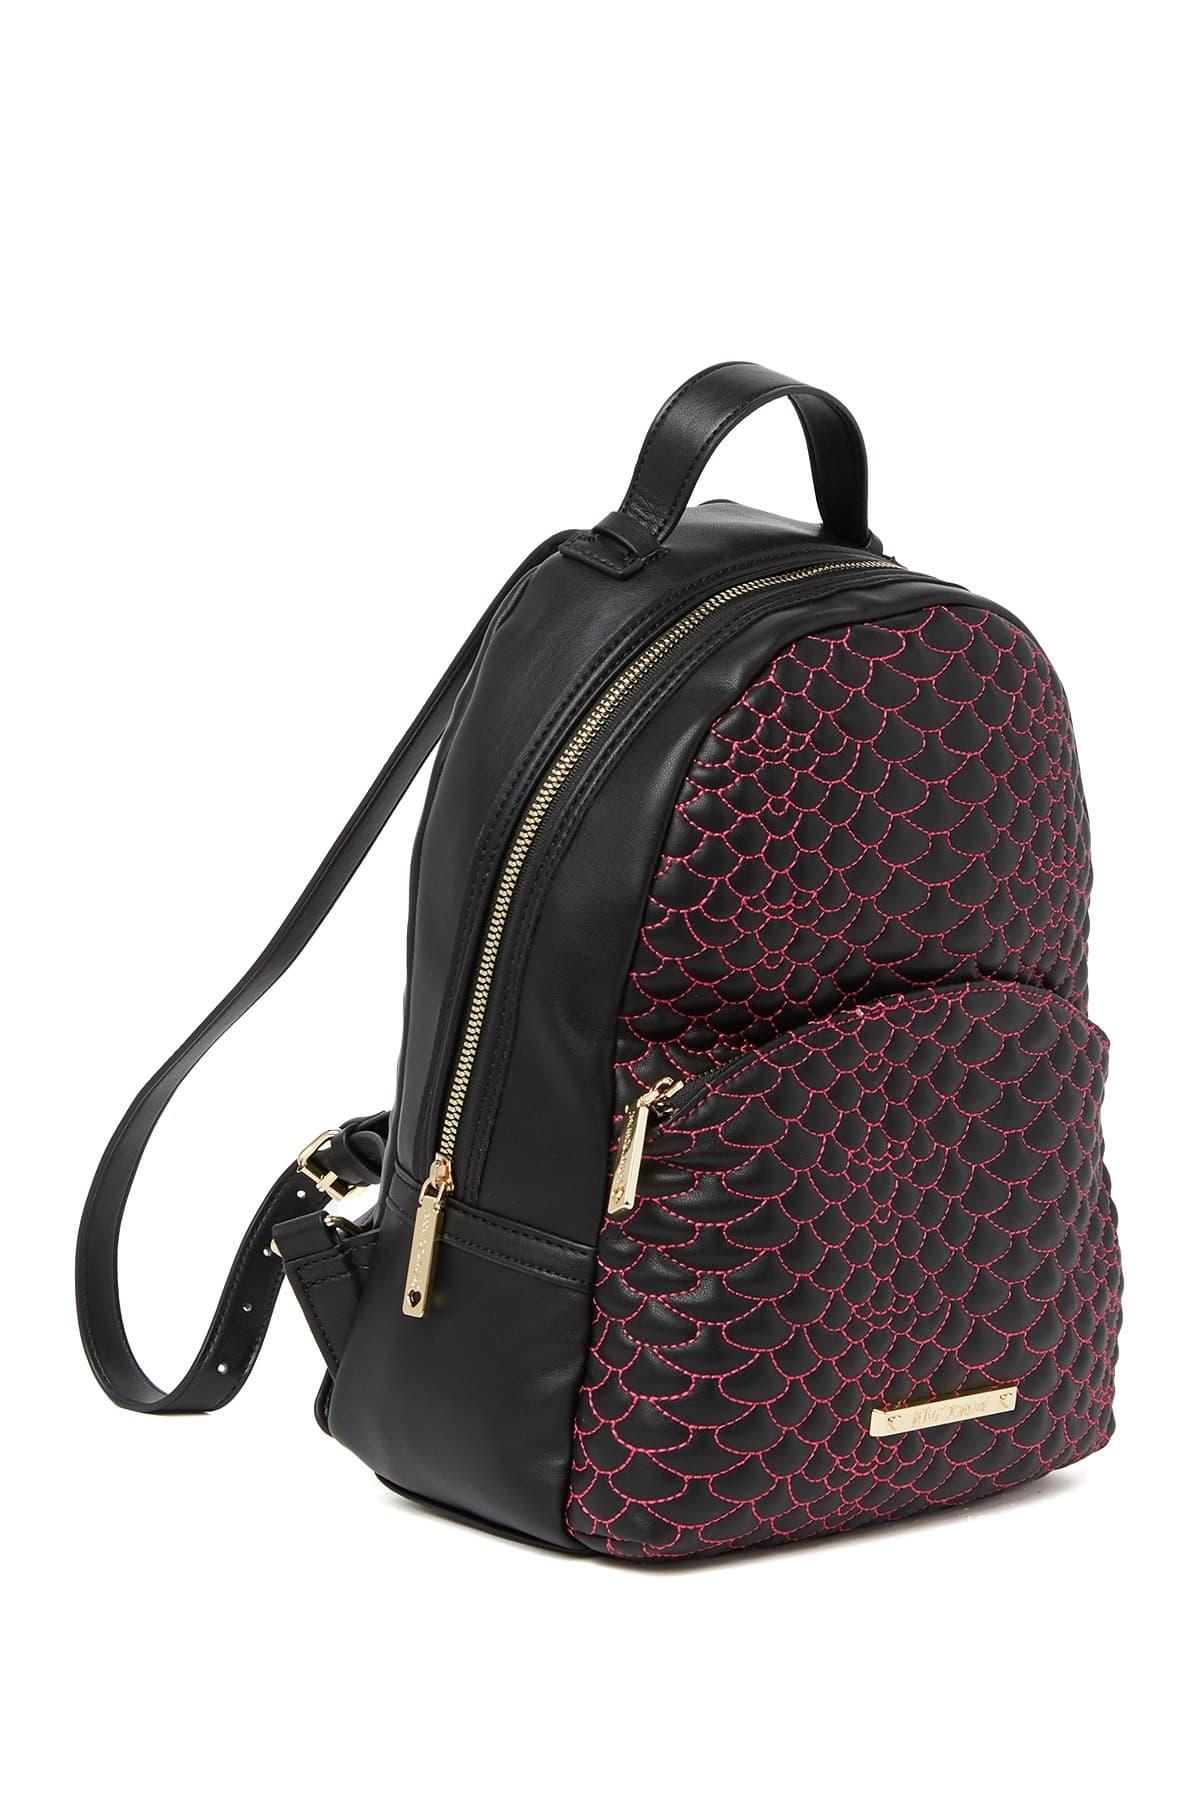 Betsey Johnson Synthetic Xokris Scalloped Backpack in Black - Lyst